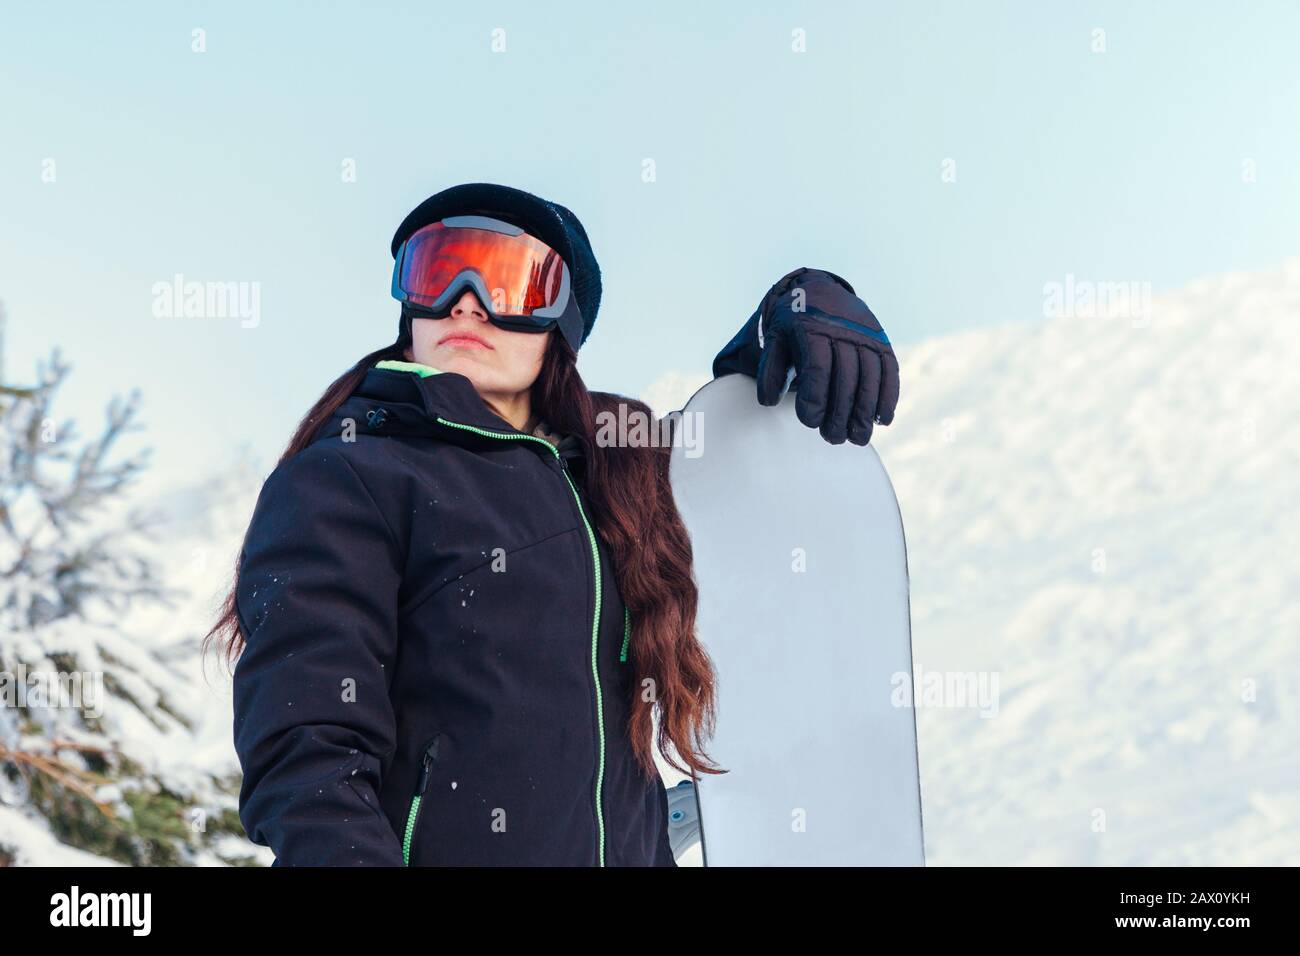 Stock photo of a young girl holding her snowboard on a snowy mountain Stock Photo